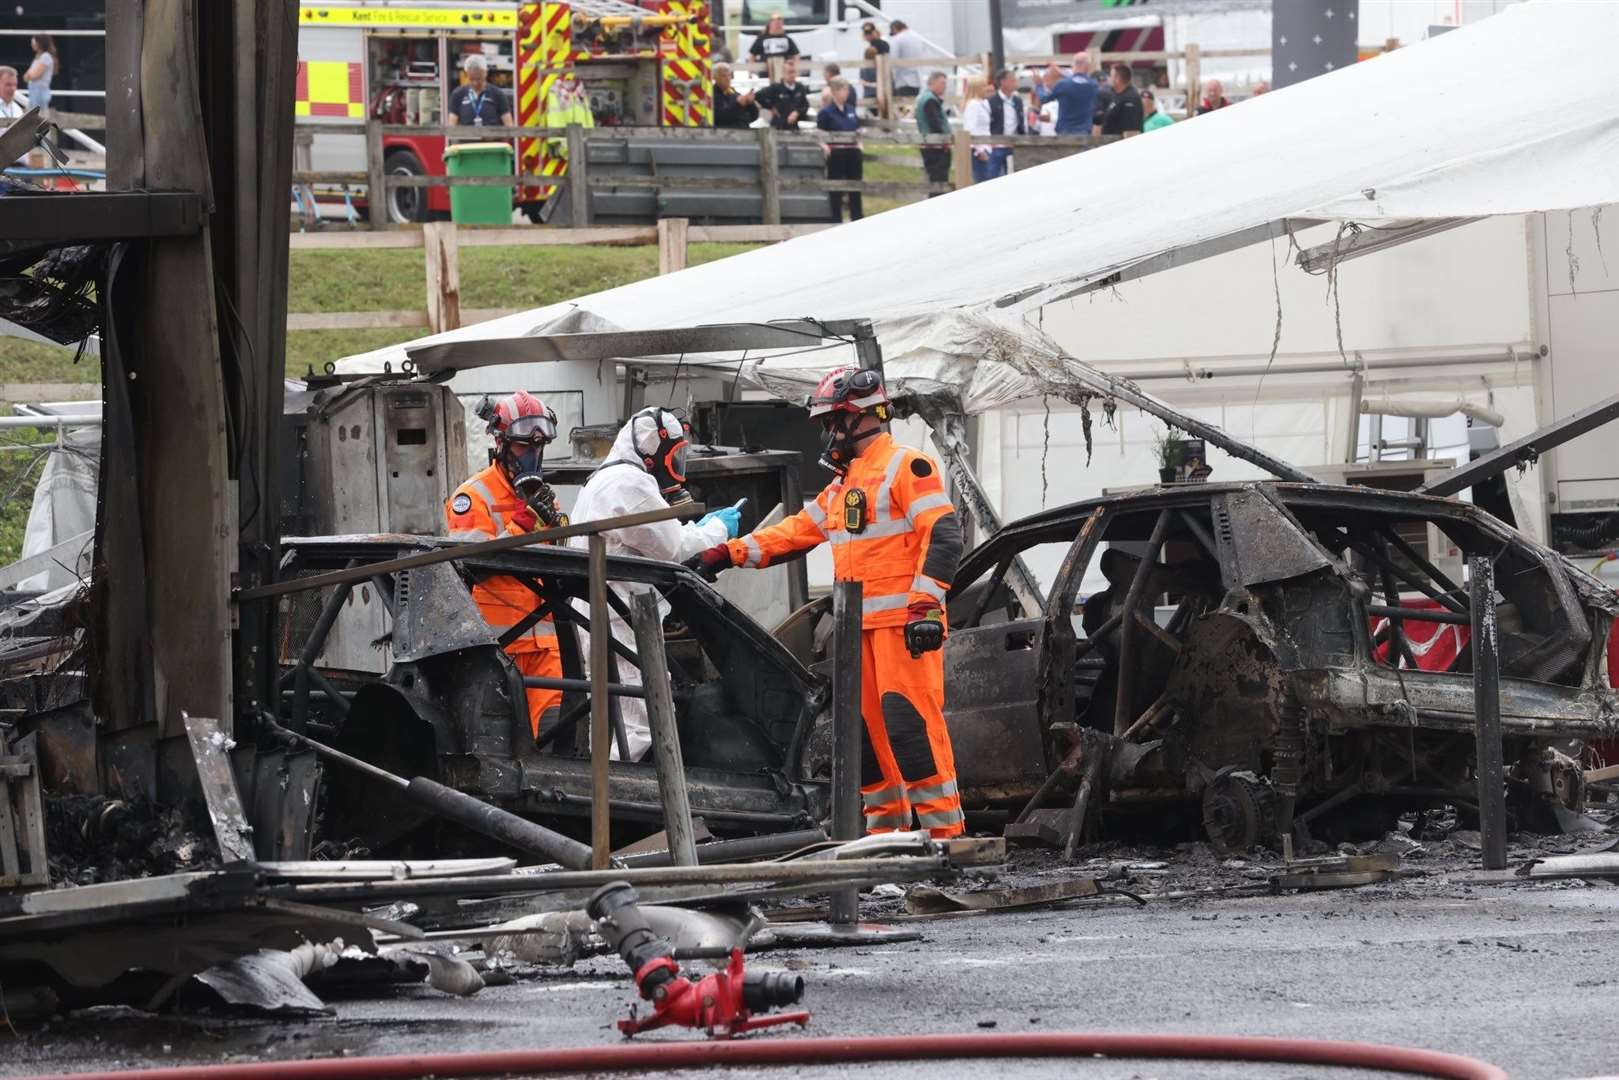 The burnt out vehicles at Lydden Hill race circuit. Picture: UKNIP